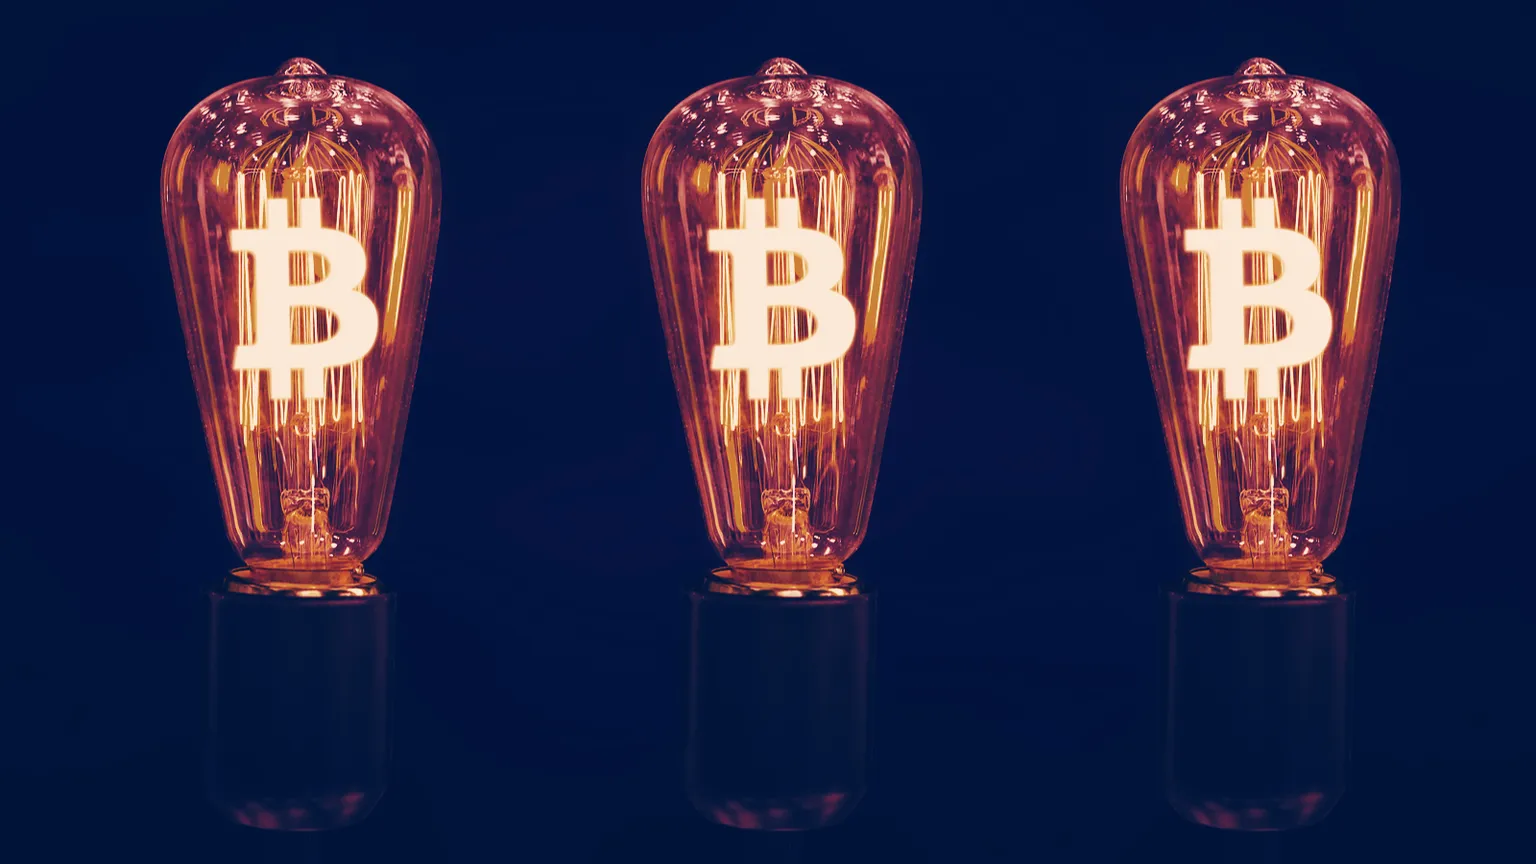 Bitcoin energy and its environmental impact is a dirty subject. Image: Shutterstock